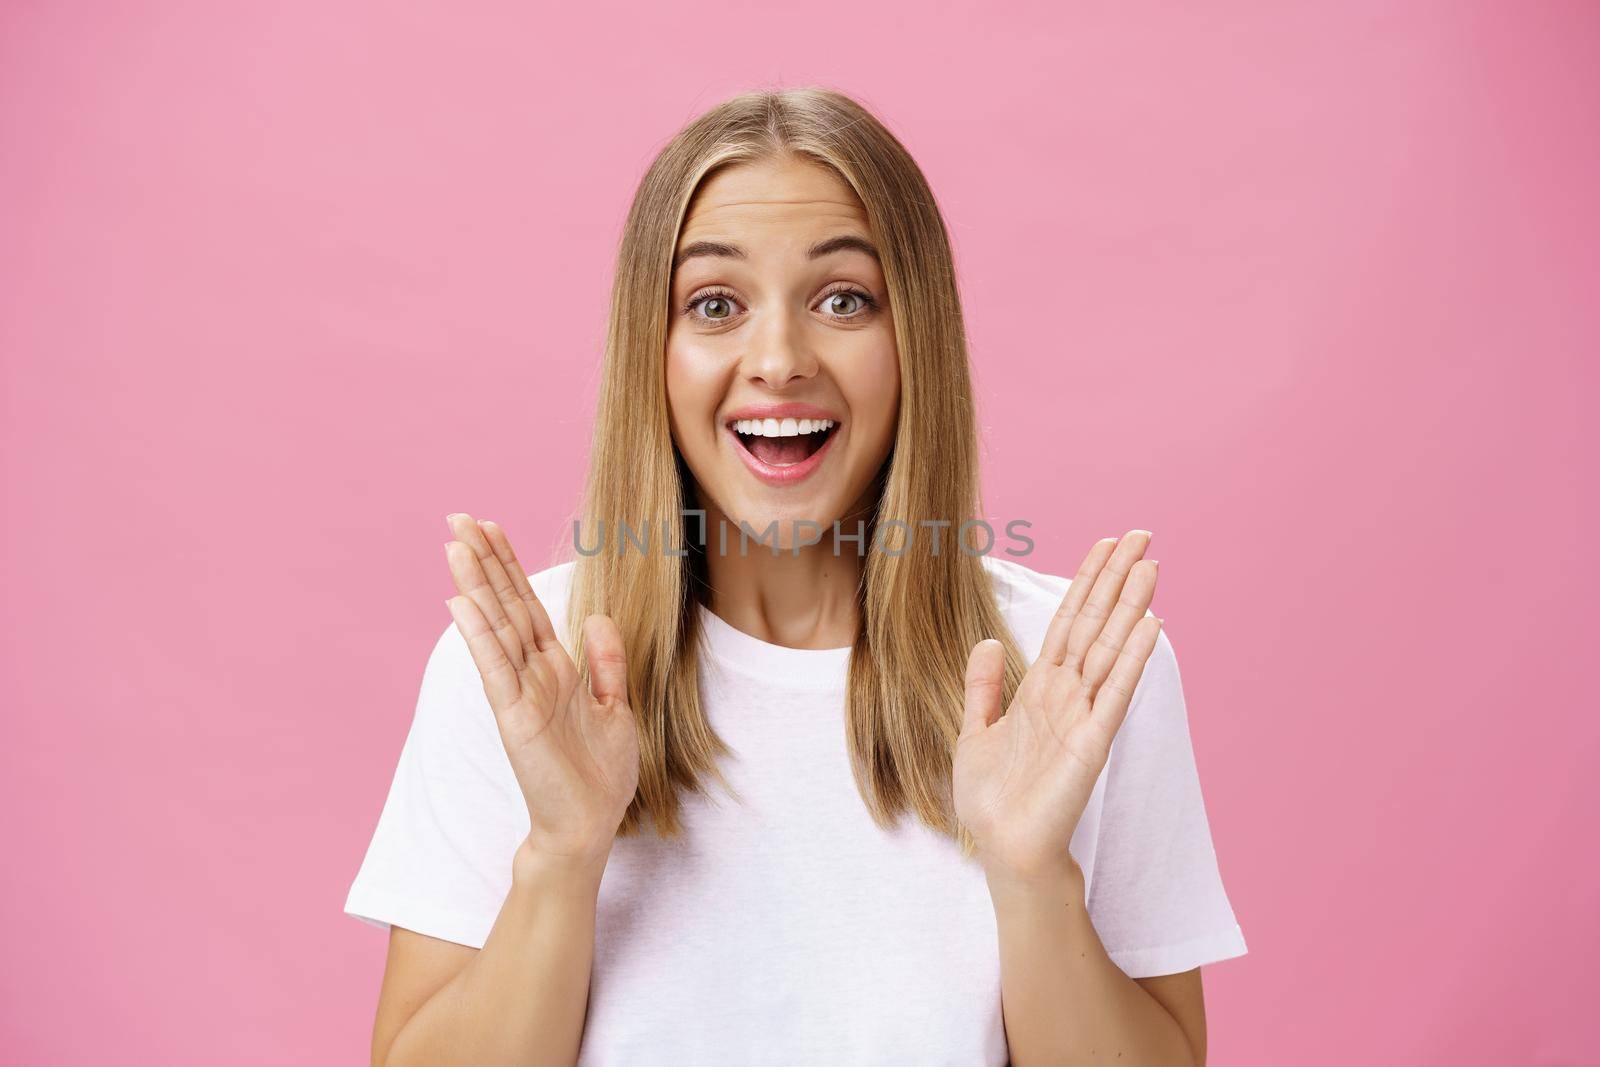 Woman learning awesome great news clasping hands in joy and excitement rejoicing feeling hapyp for friend smiling broadly and looking cheerful at camera with amused expression over pink background by Benzoix